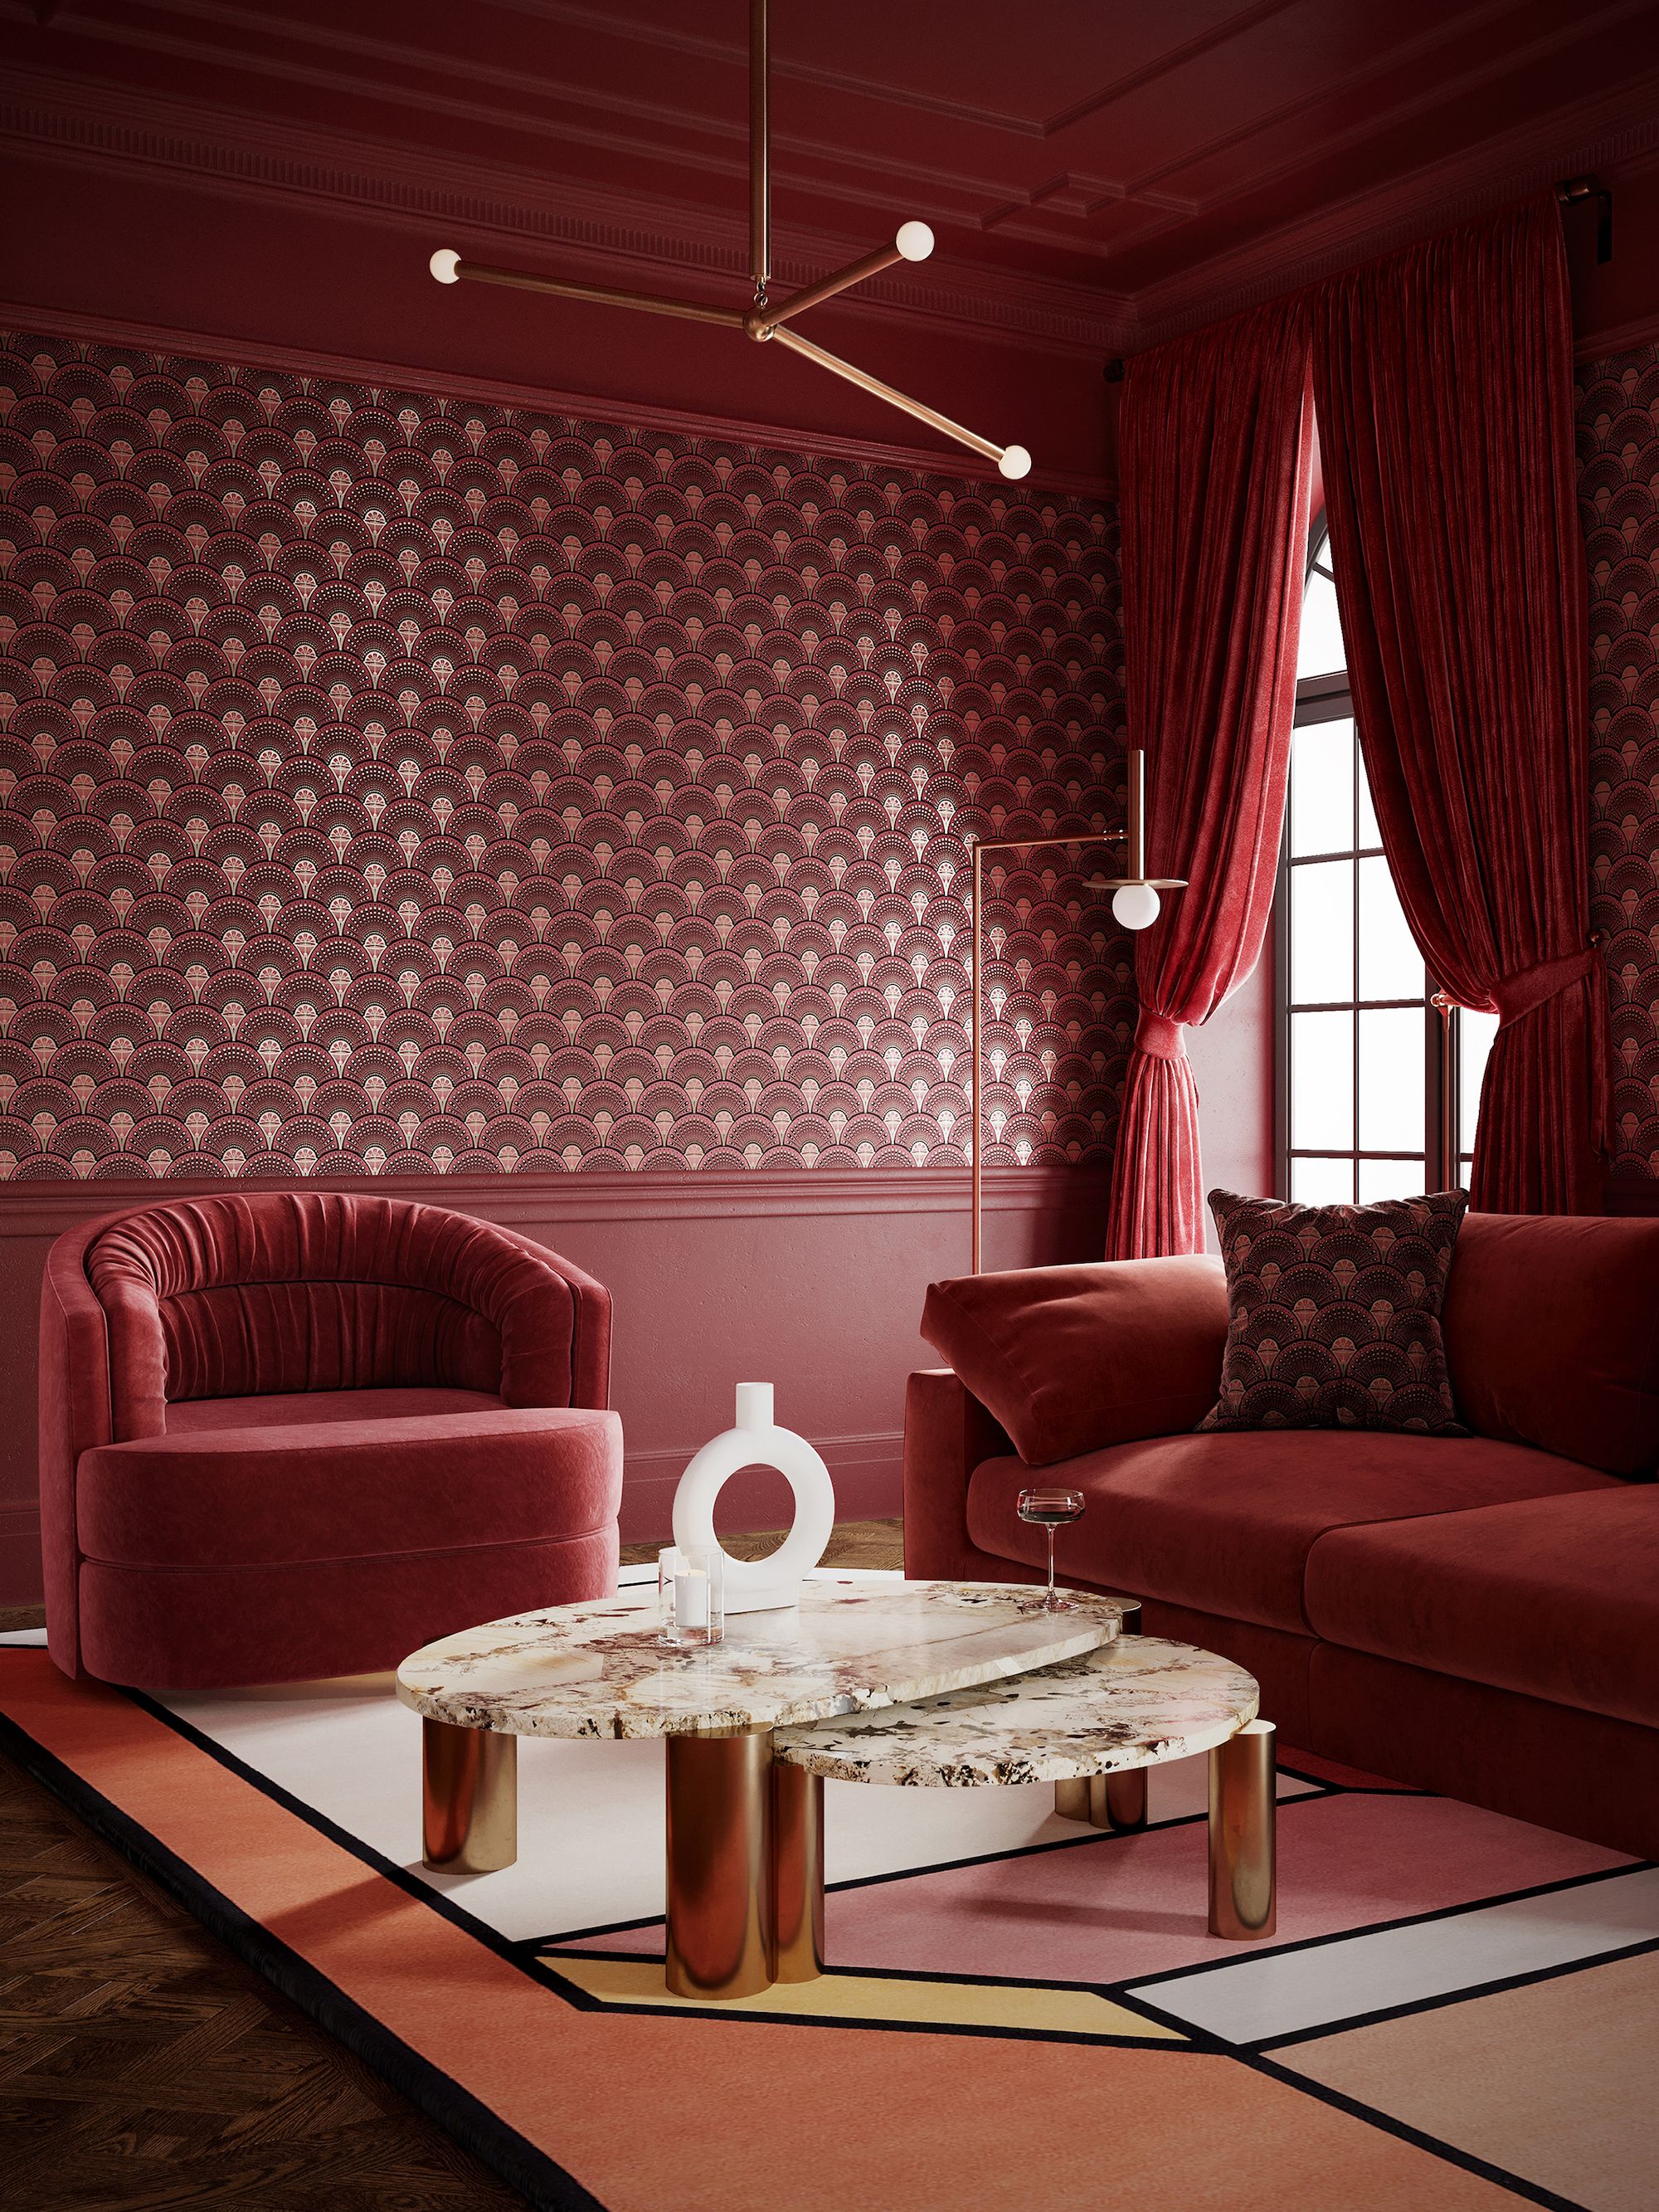 Wes Anderson Trend: 12 Wes Anderson Aesthetic Home Decor Ideas